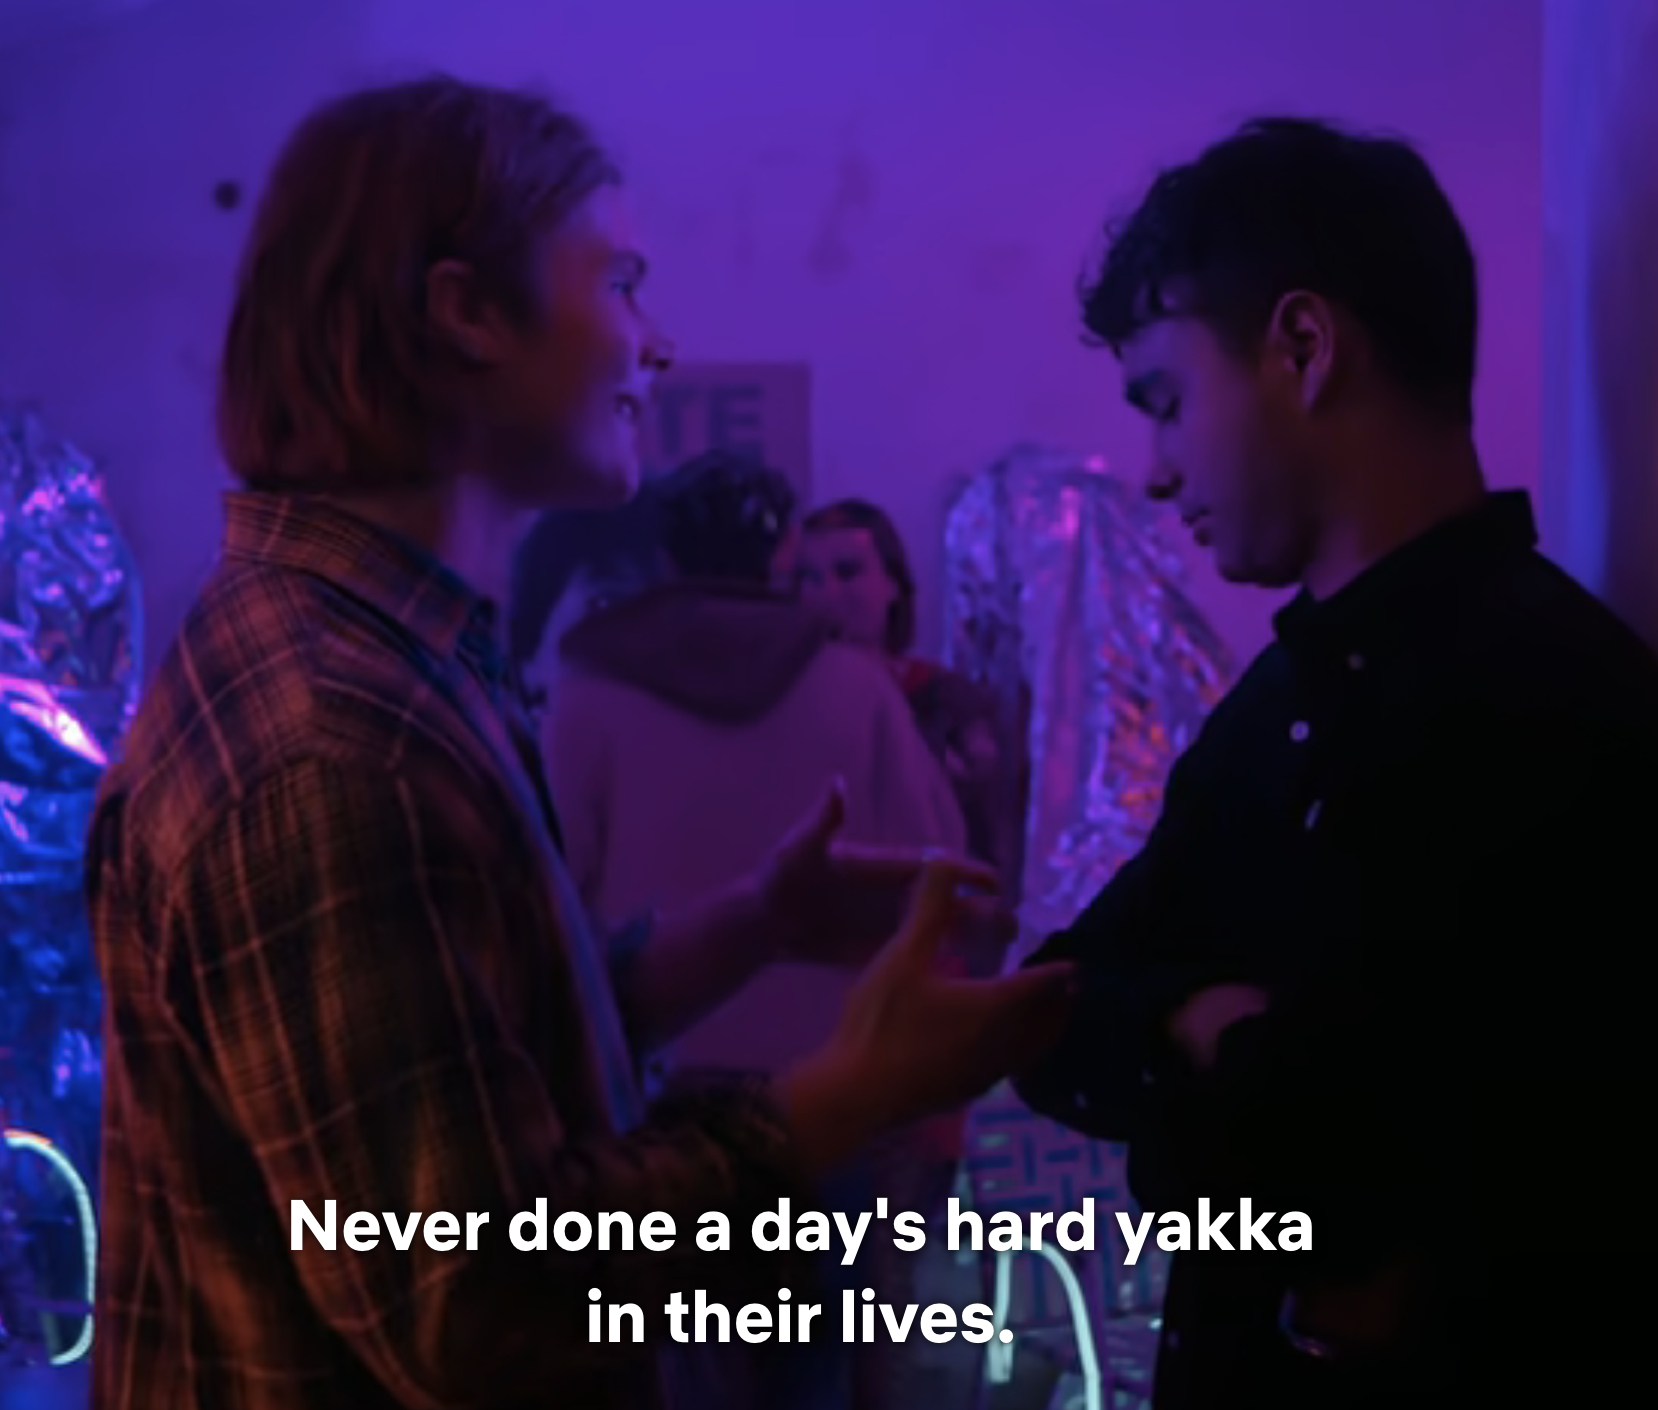 Two people engaged in a conversation in a dimly lit room with subtitles on the screen